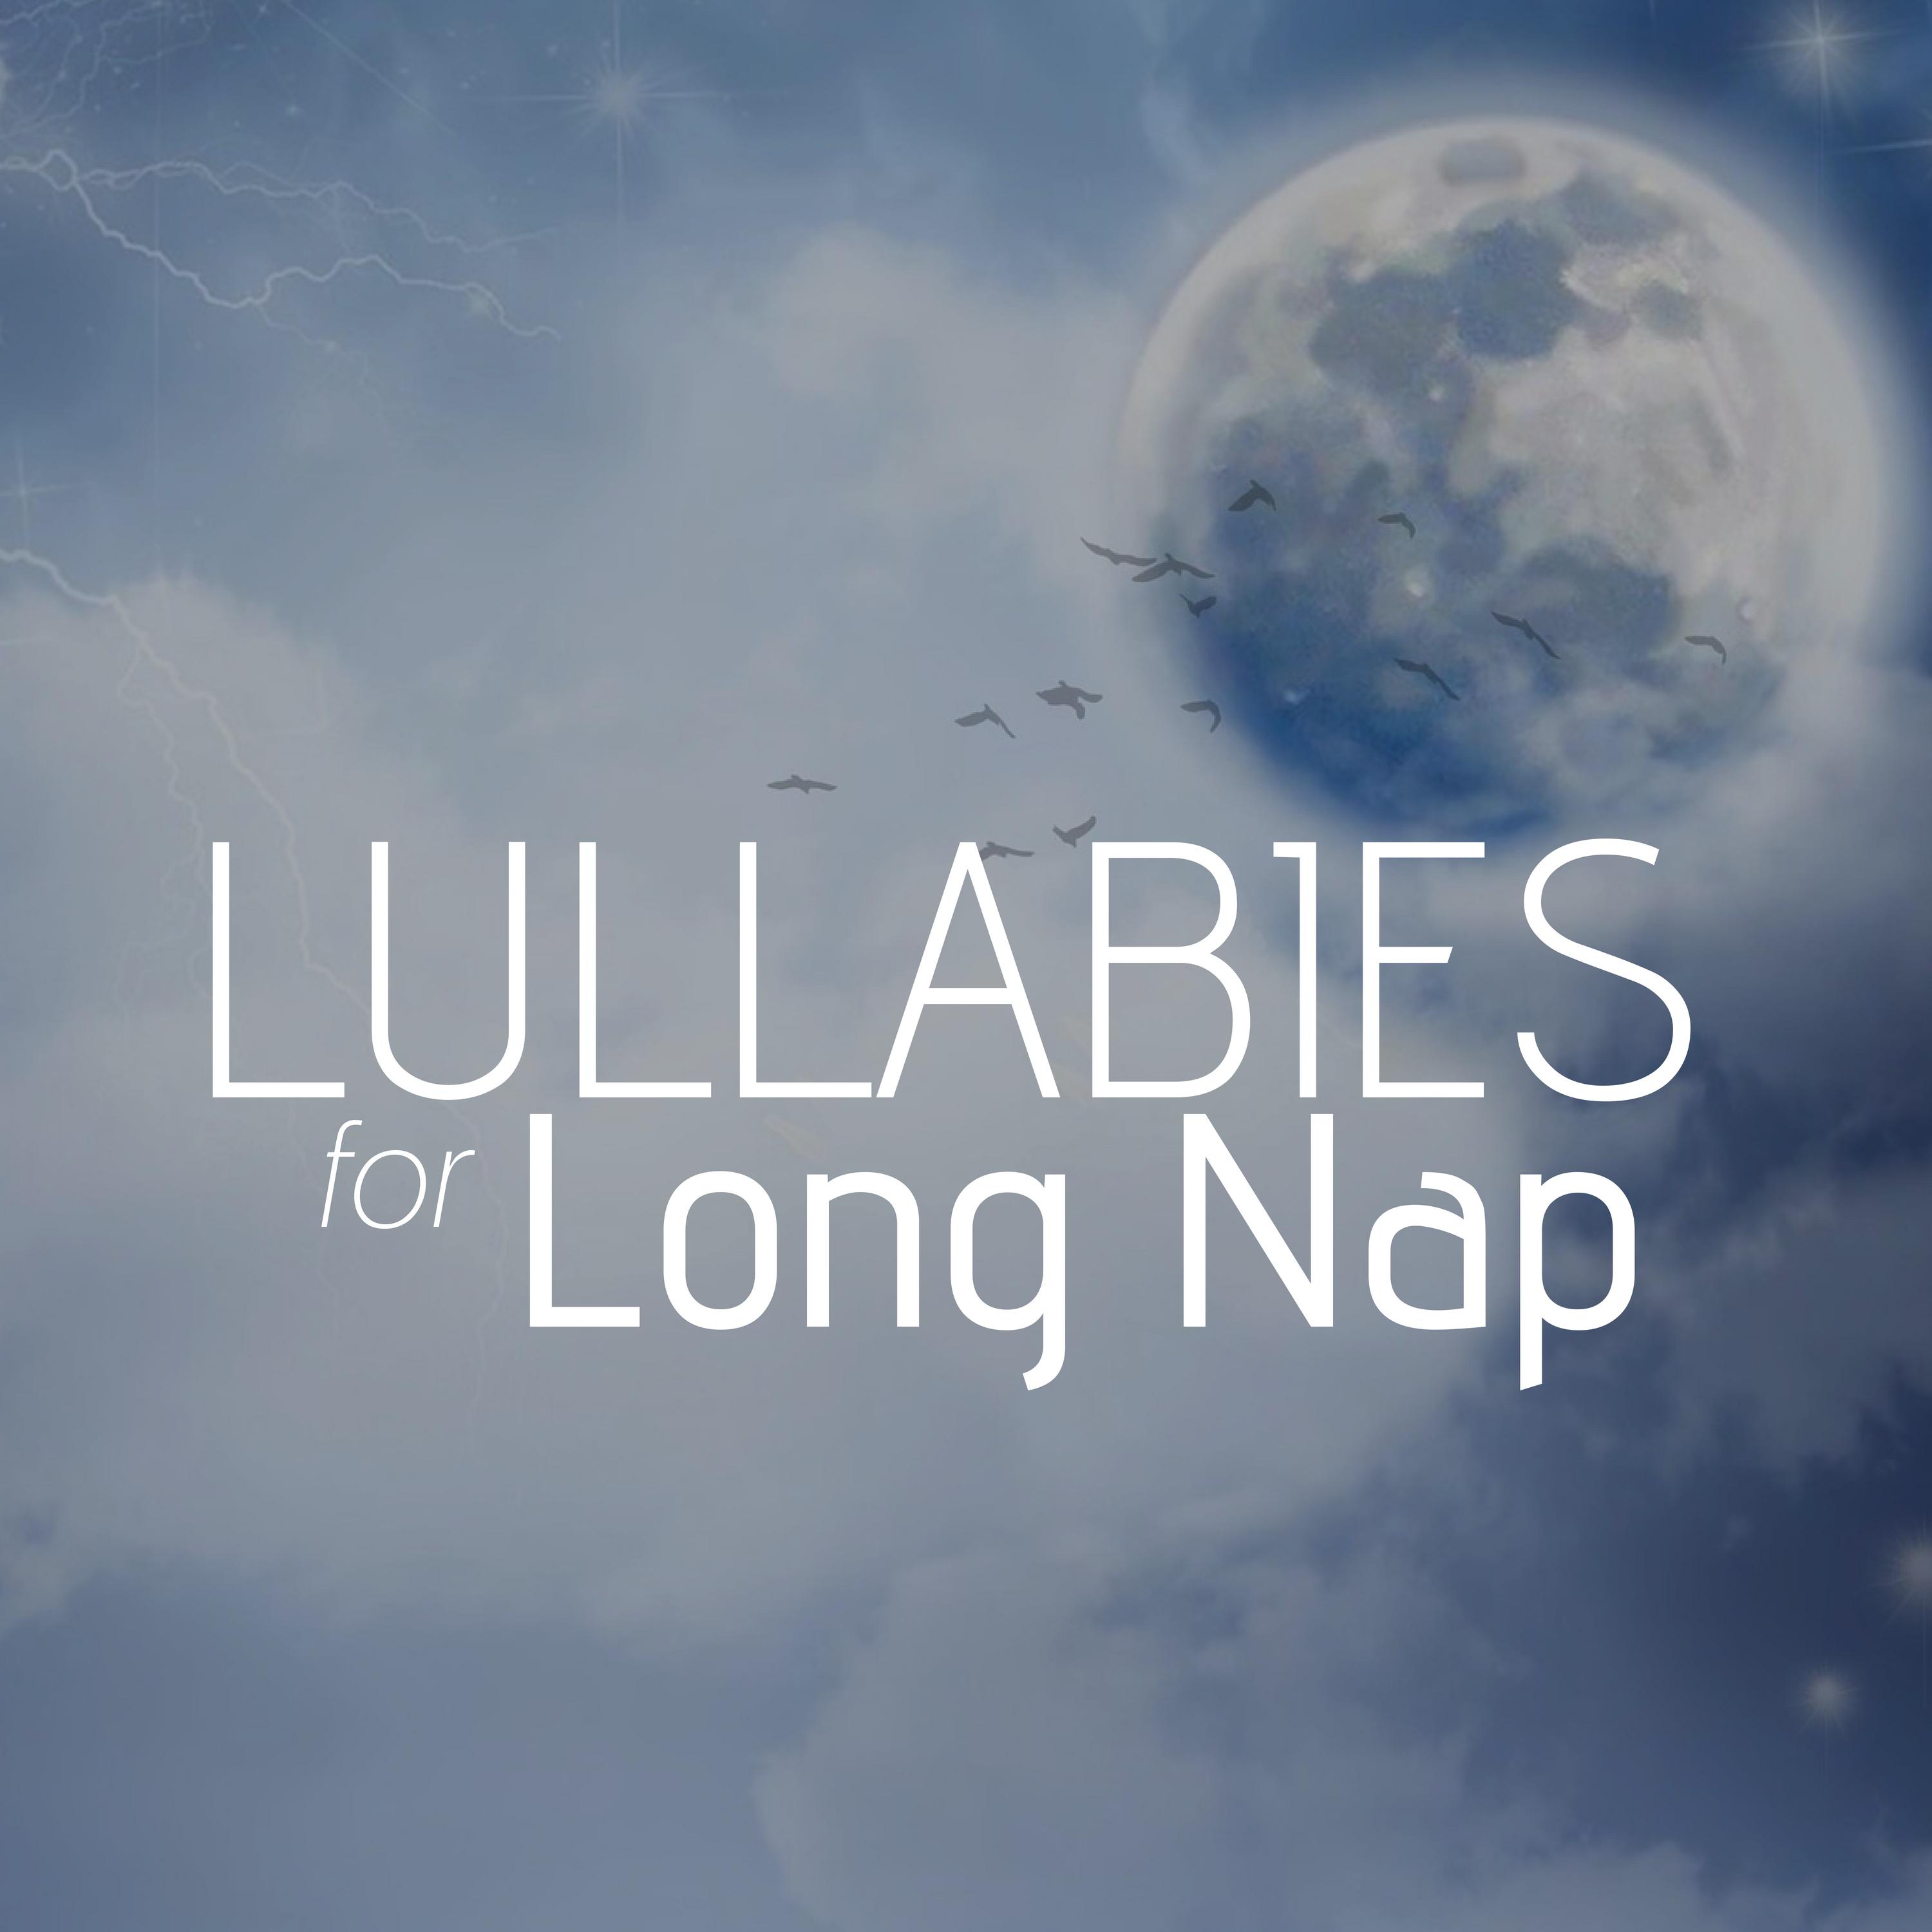 Lullabies for Long Nap: The Perfect Sleep Music for Dreaming with Nature Sounds and aa Soothing and Calming Ambient Music